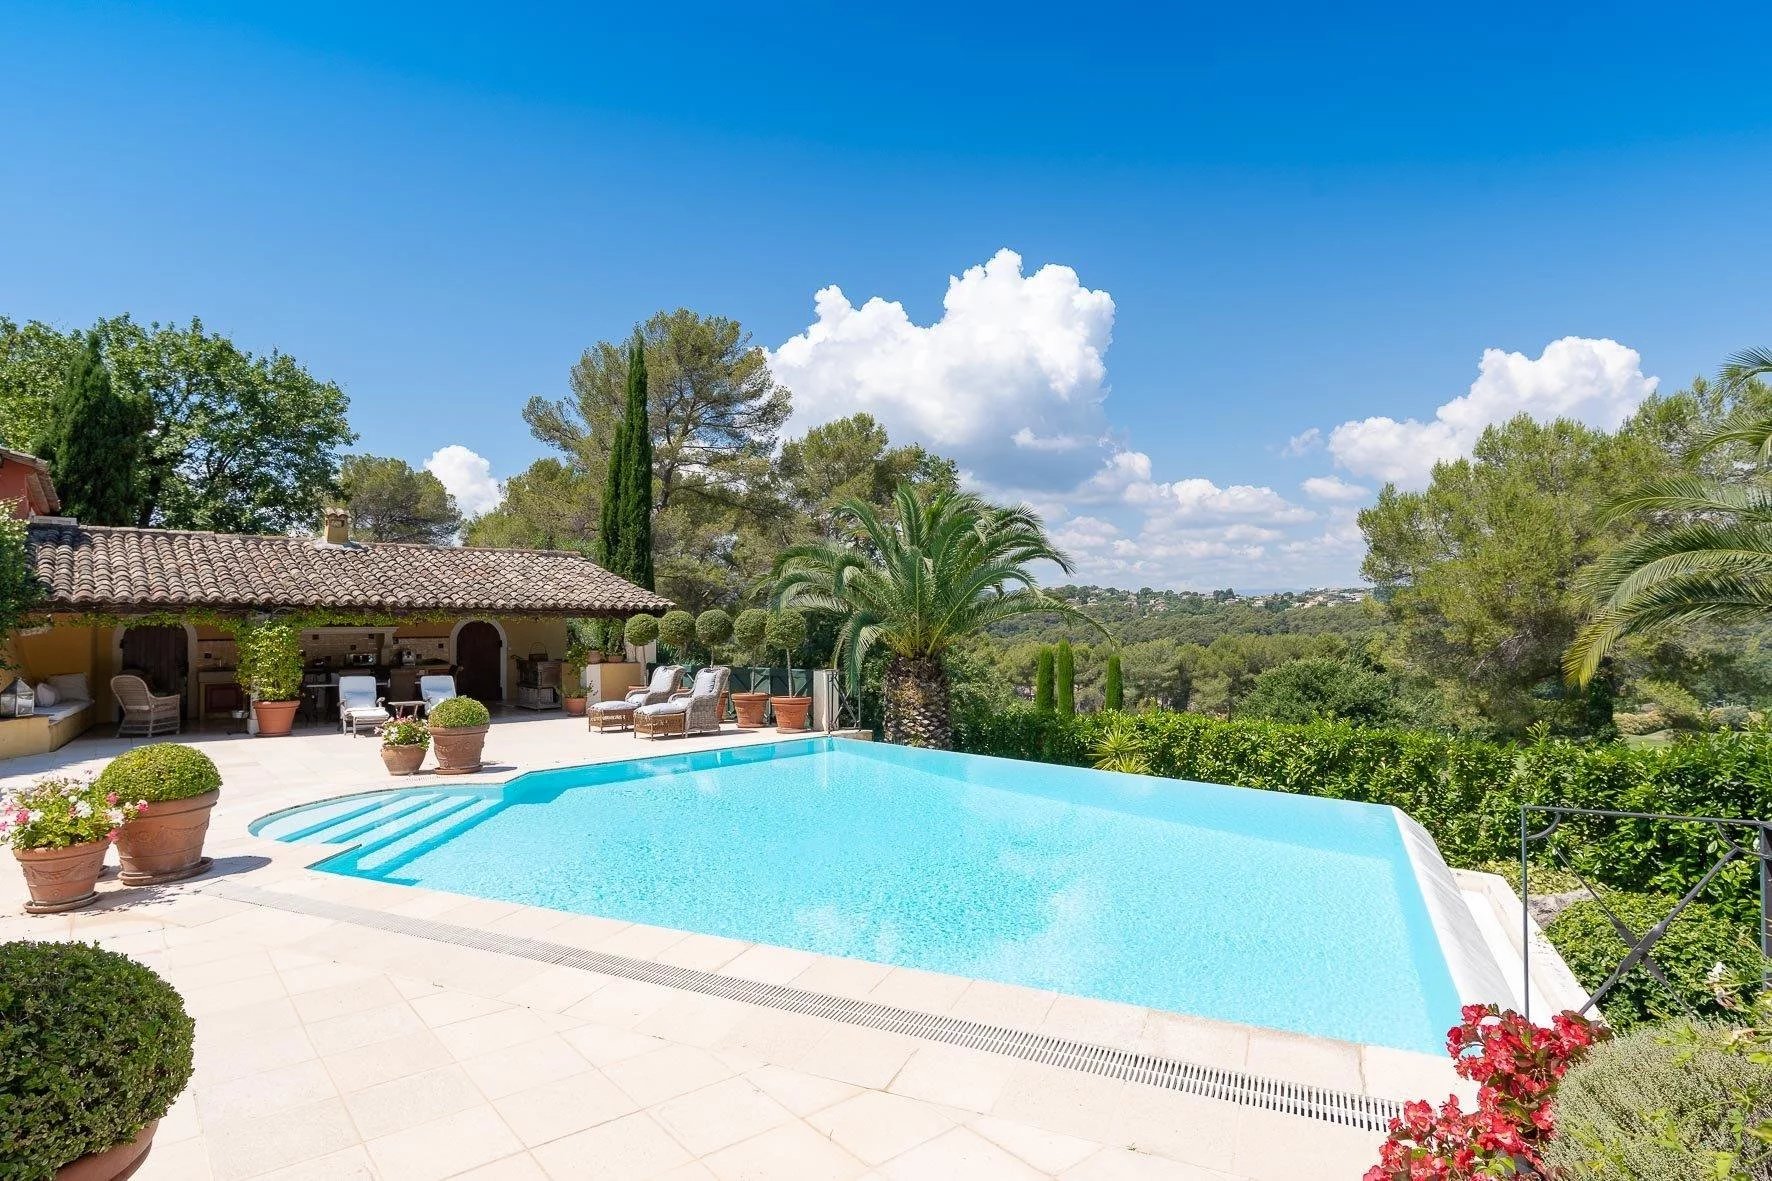 Beautiful provencal villa with vast garden and pool